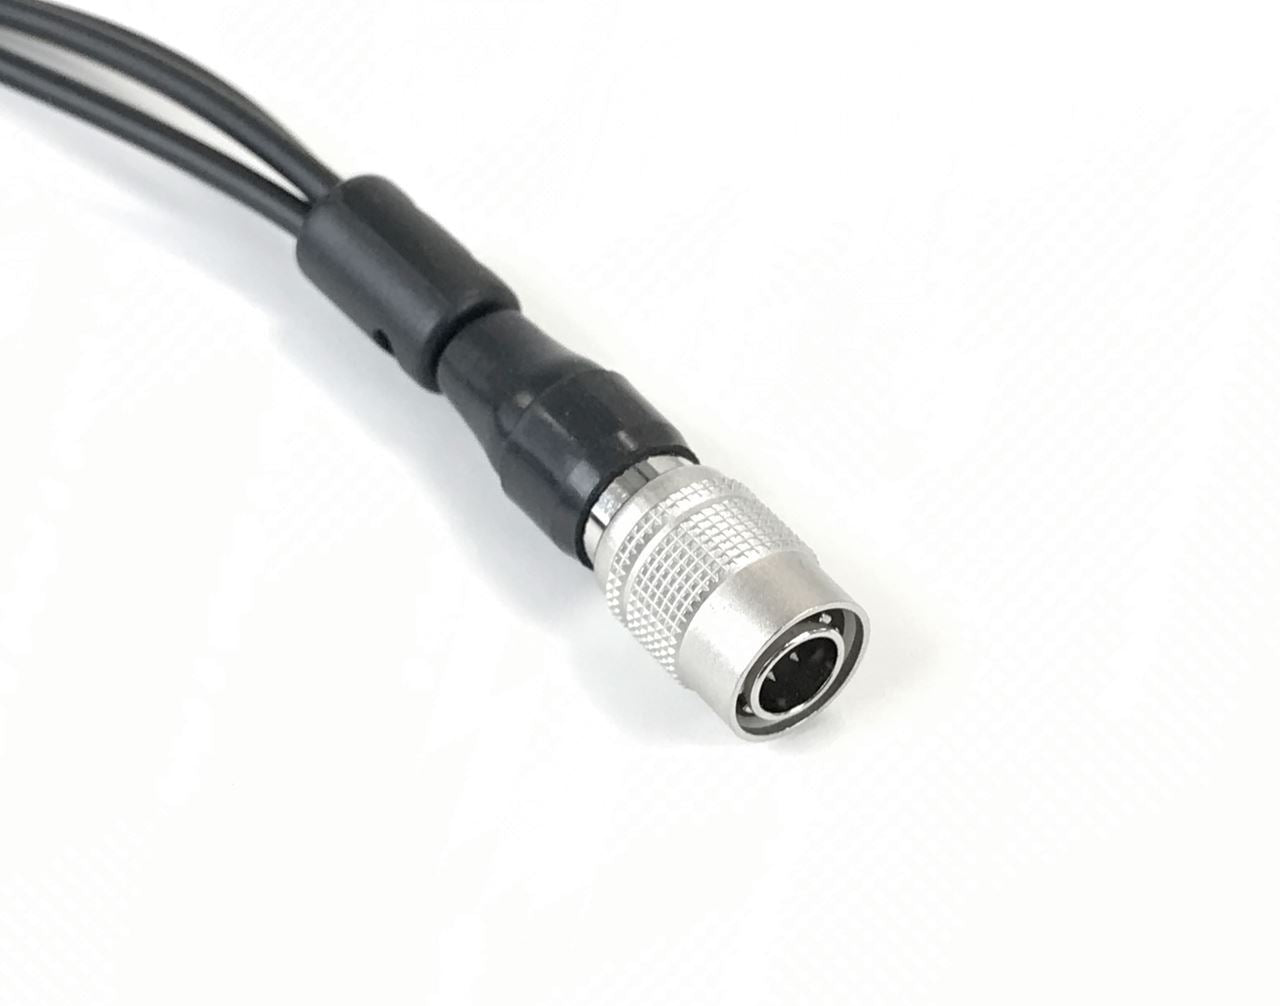 Comparable KHS-12 3 wire mini lapel mic with earphone for use with the Kenwood NX-410 Portable Radio. - Waveband Communications